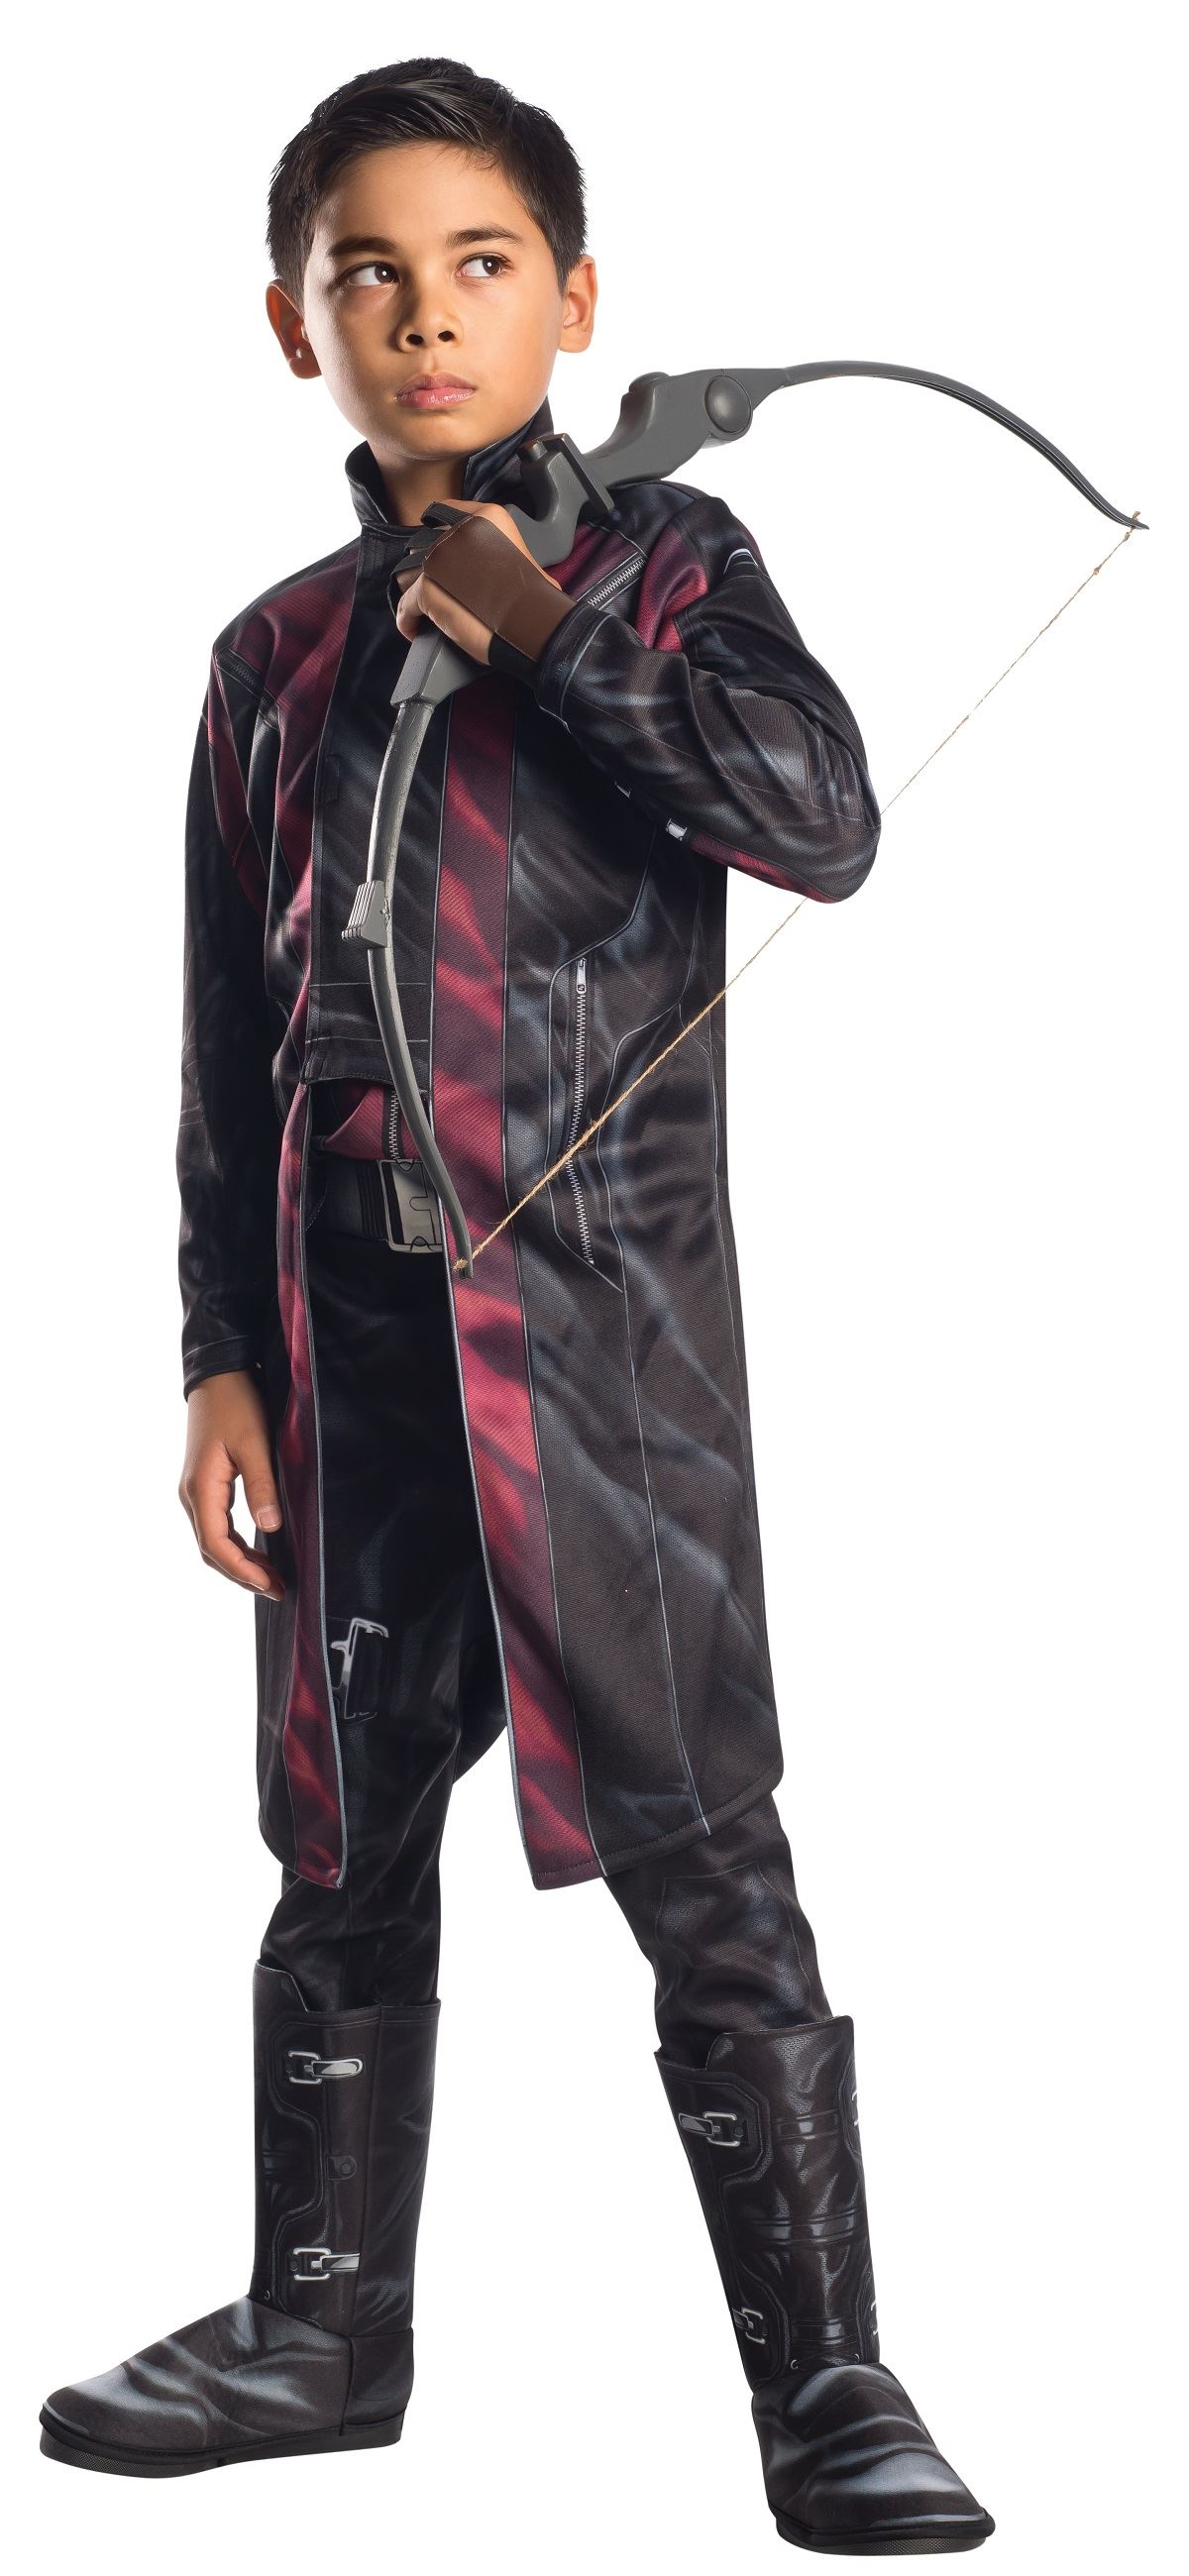 Kids Hawkeye Bow And Arrow Set  $19.99  The Costume Land